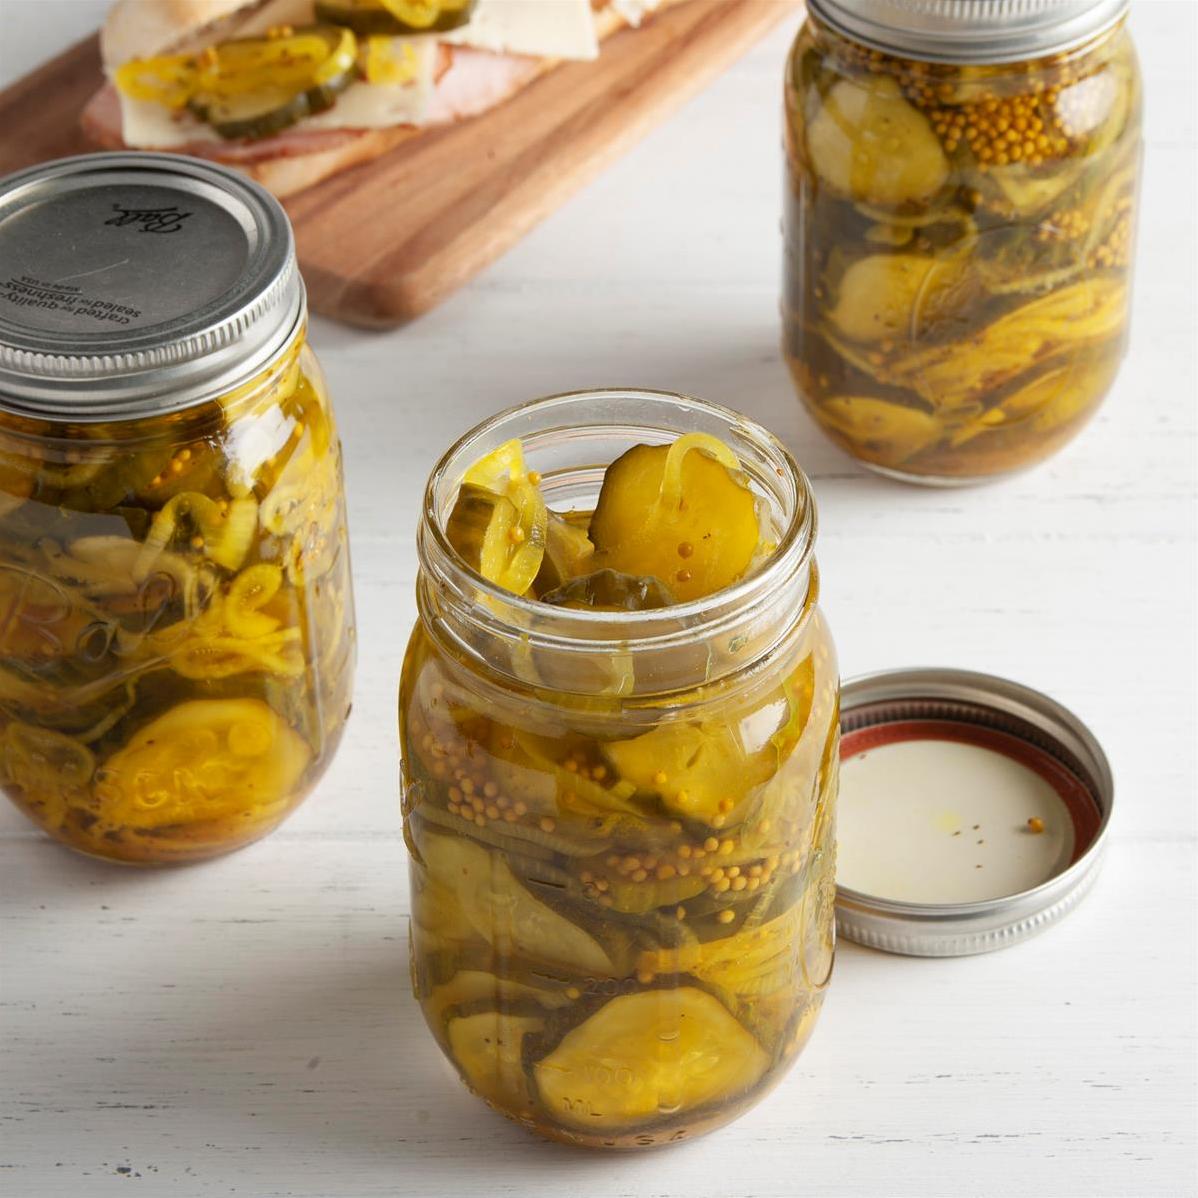  Looking for a quick snack? Grab a jar of our pickles and enjoy them straight from the jar.